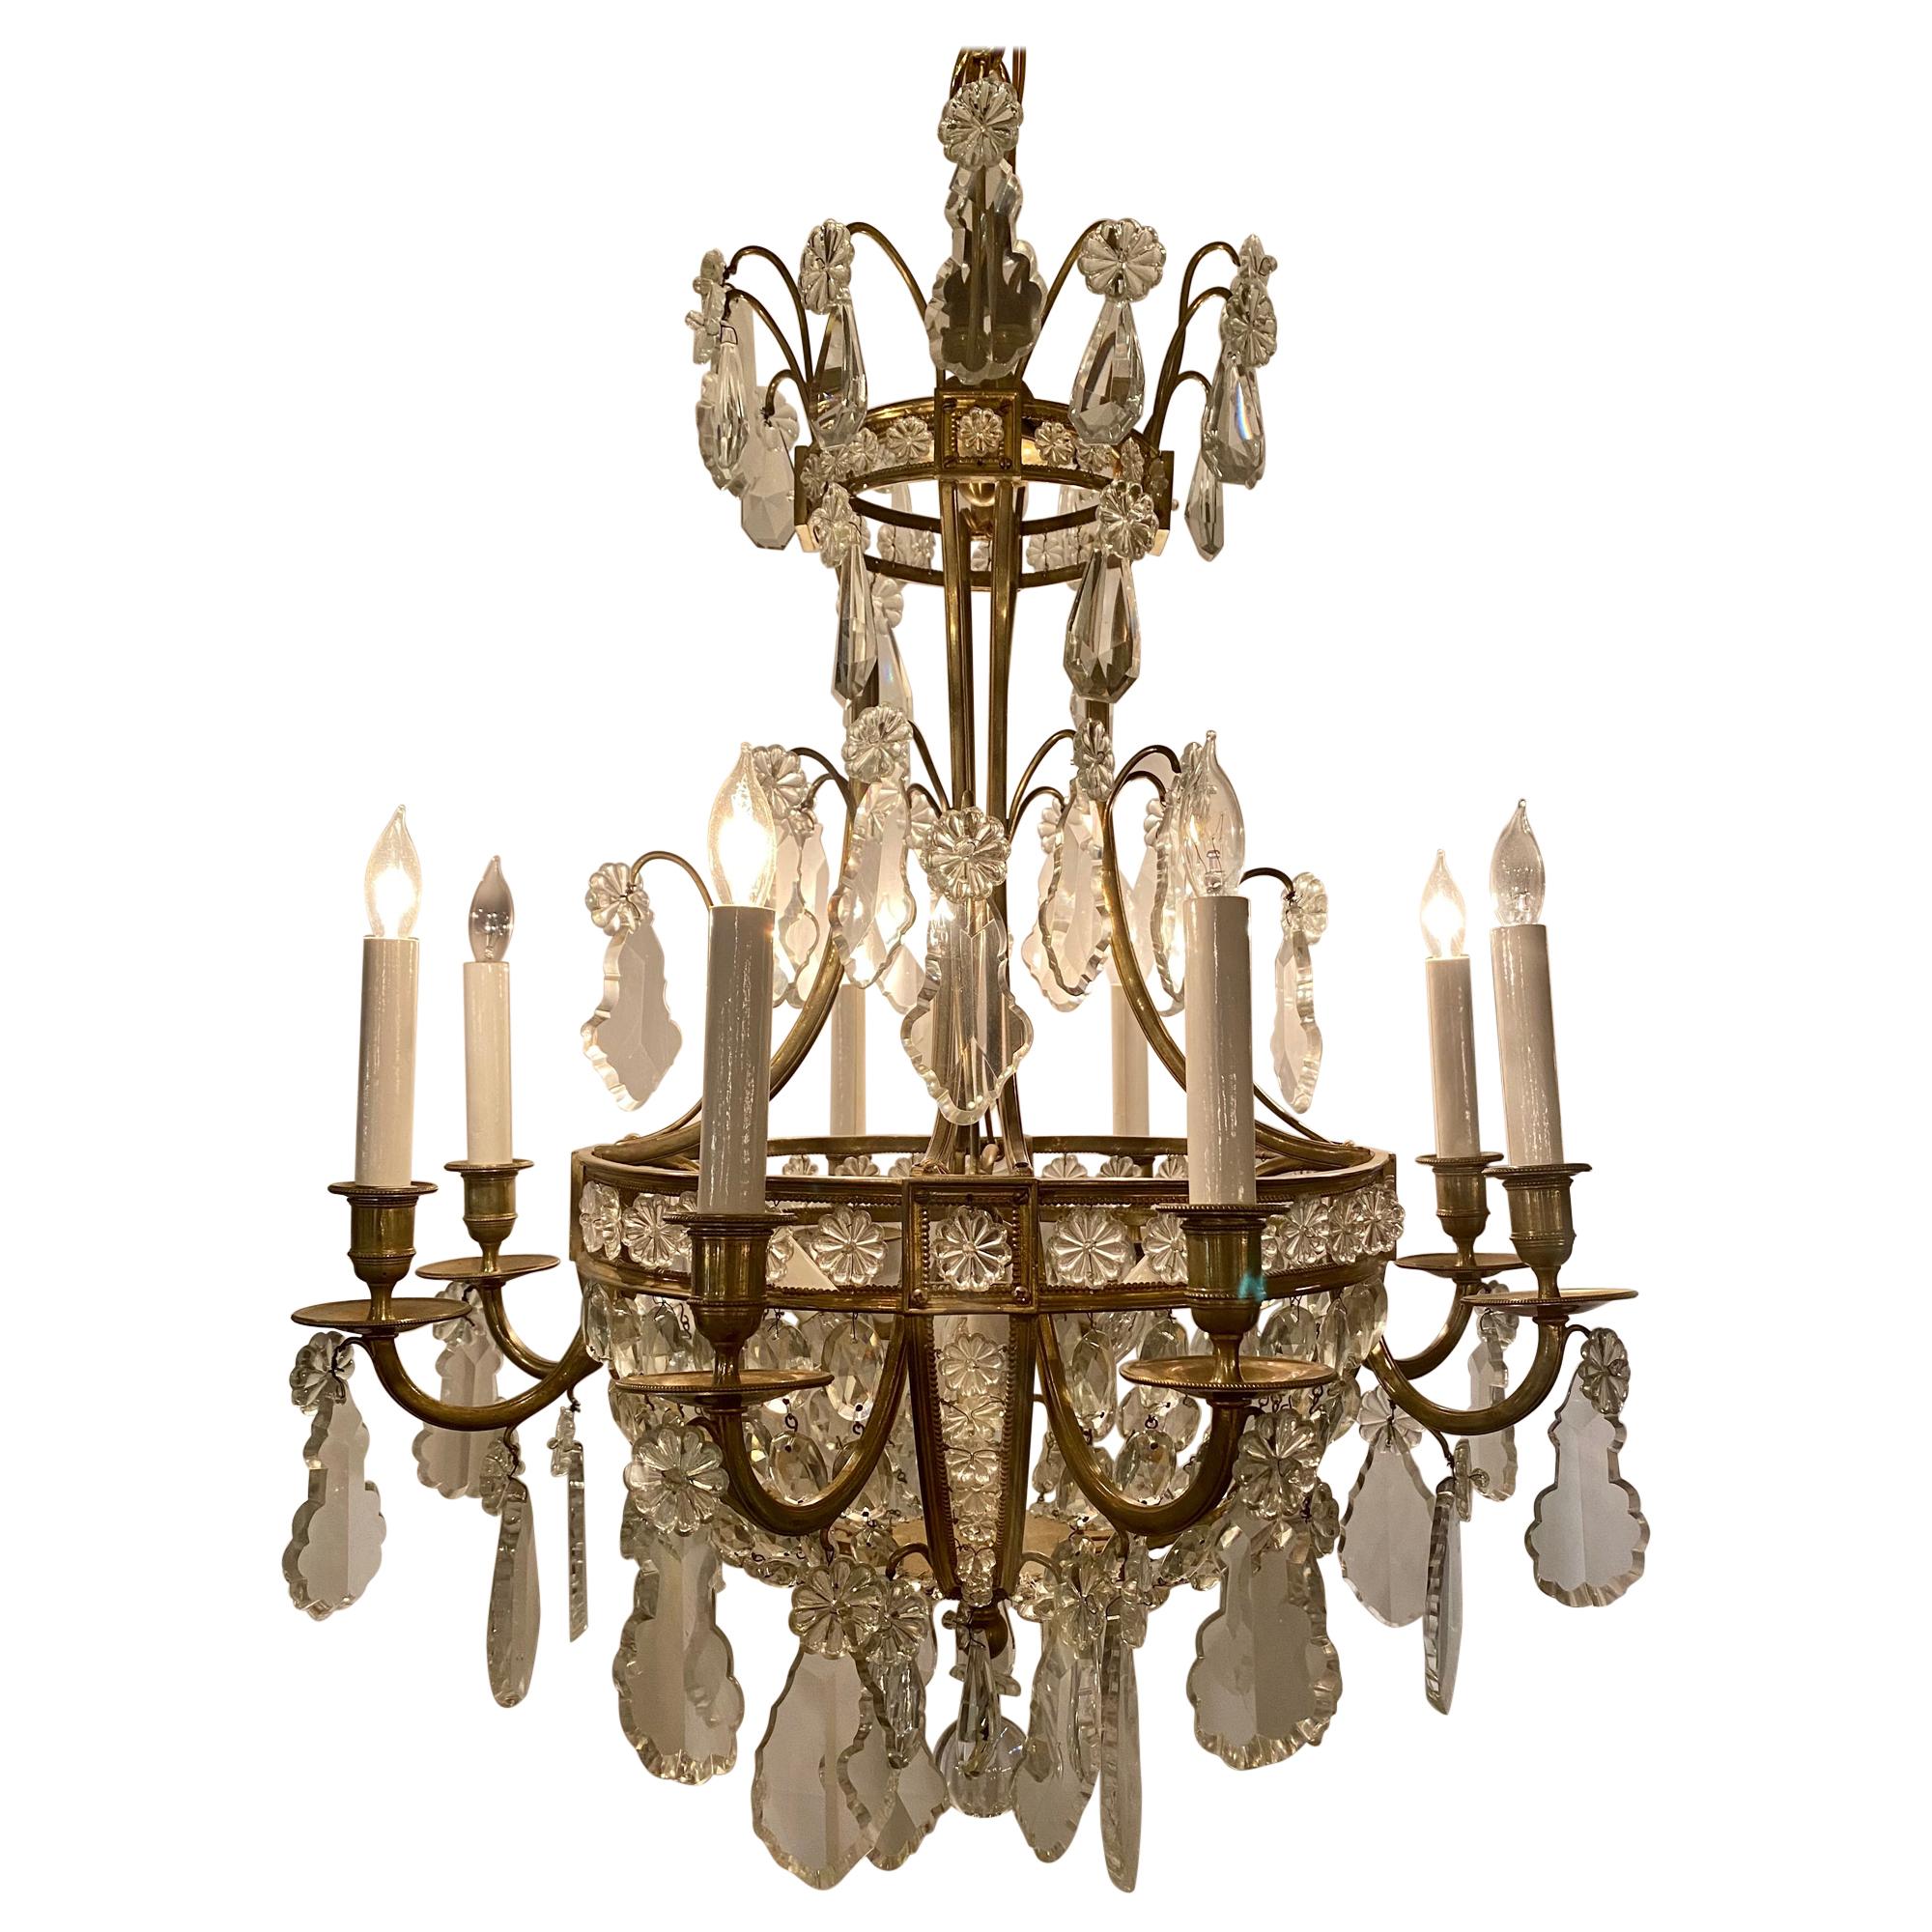 Antique French Delicately Beaded Crystal and Ormolu Chandelier